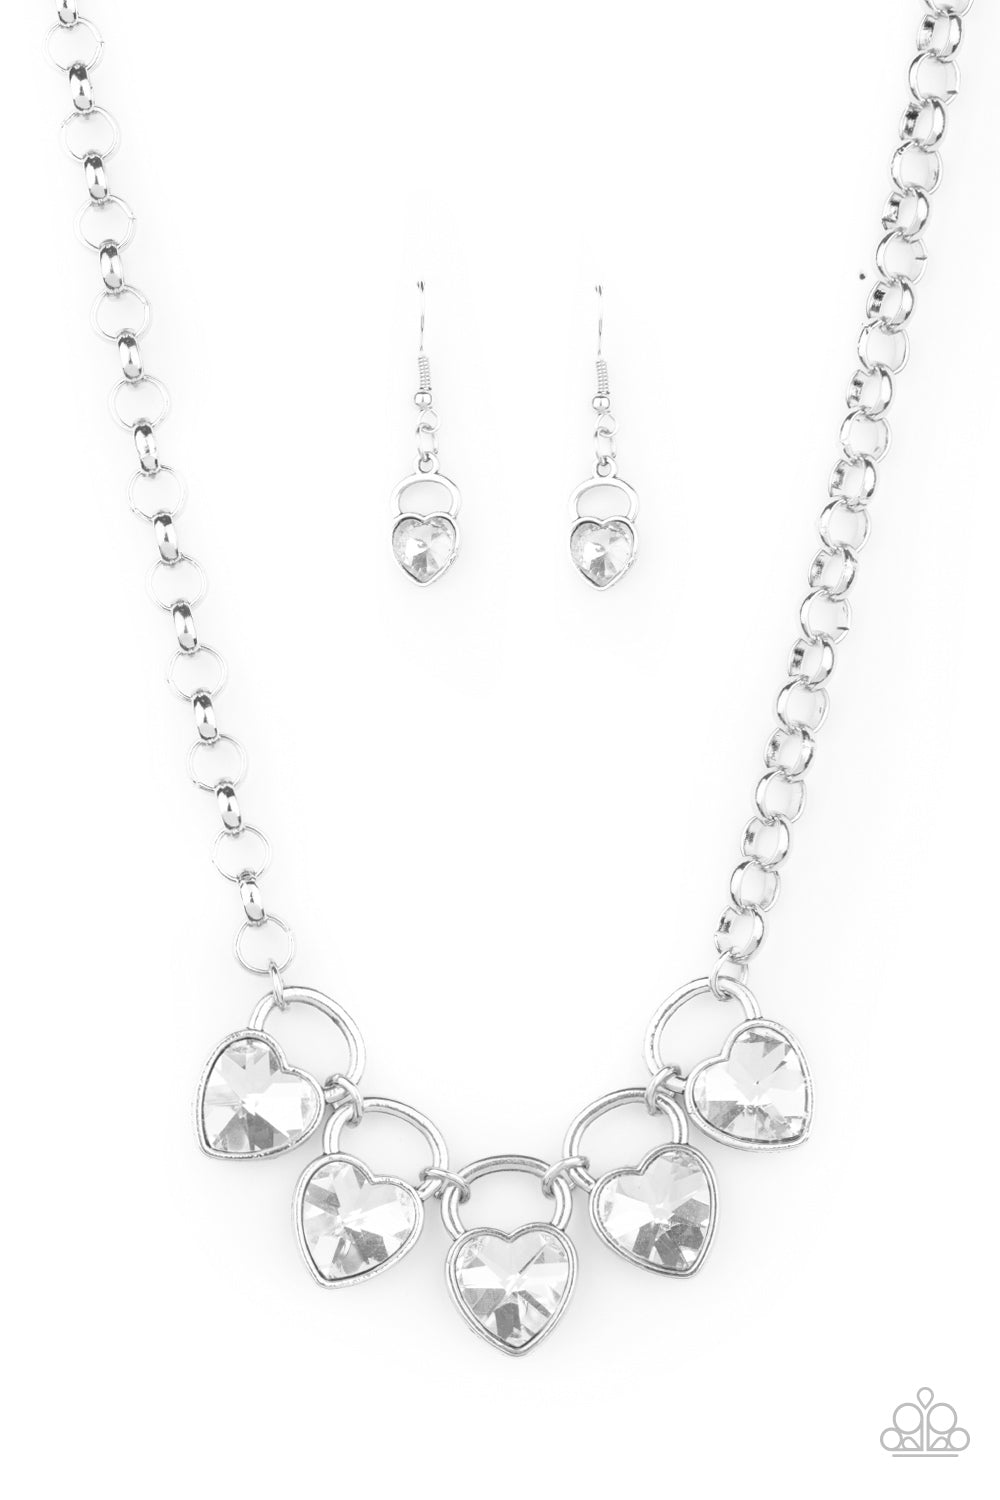 Paparazzi HEART On Your Heels White Short Necklace - Life Of The Party Exclusive January 2021 - P2WH-WTXX-270XX